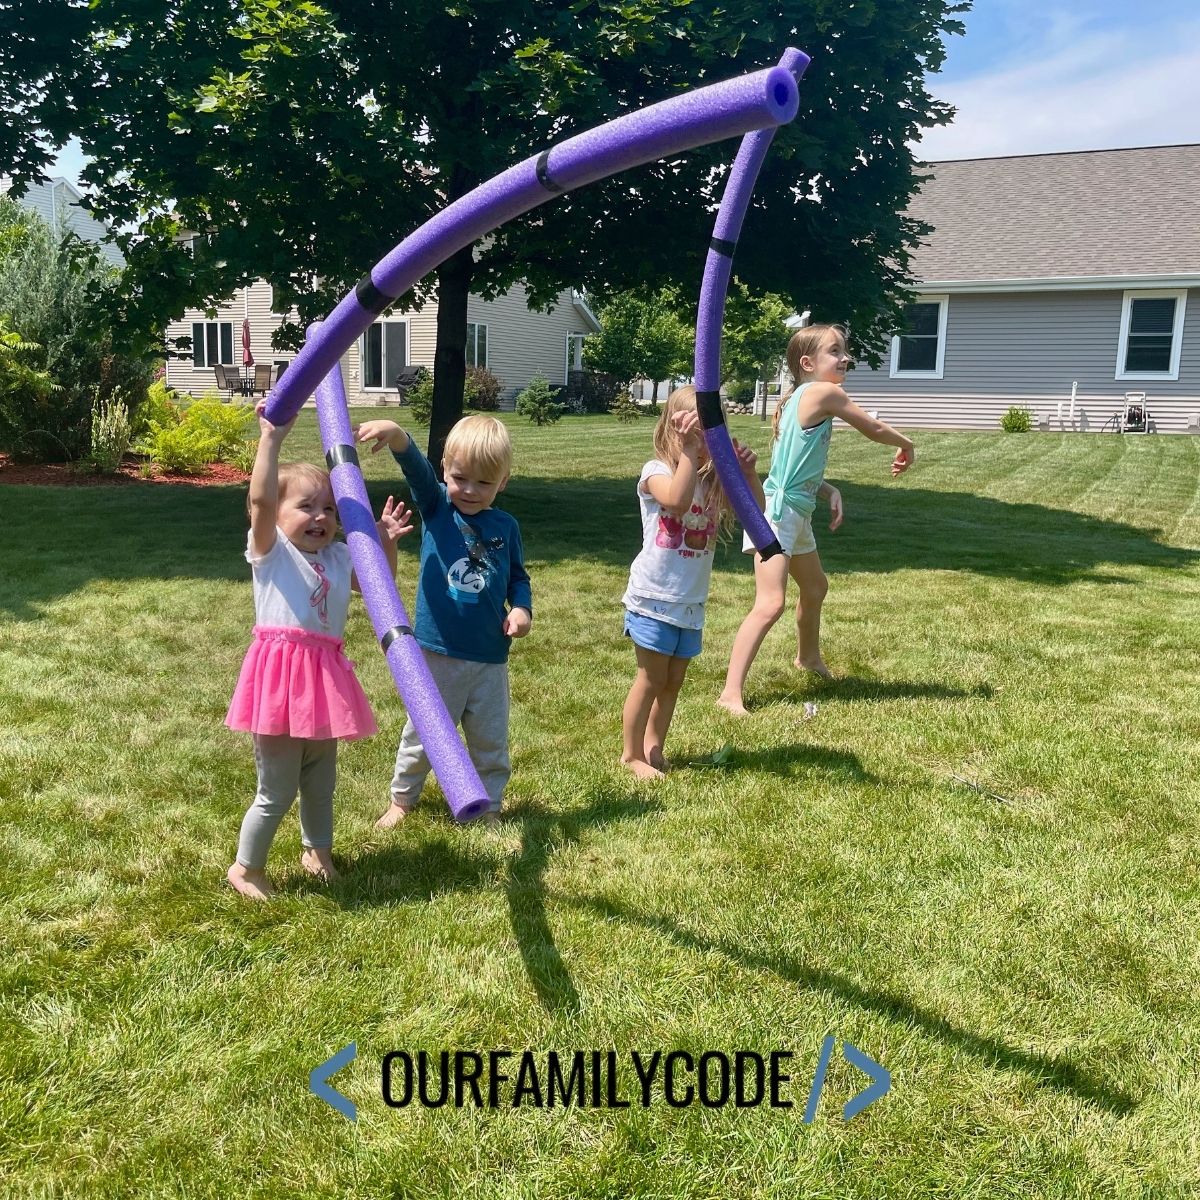 A picture of kids throwing javelin pool noodles in the backyard.